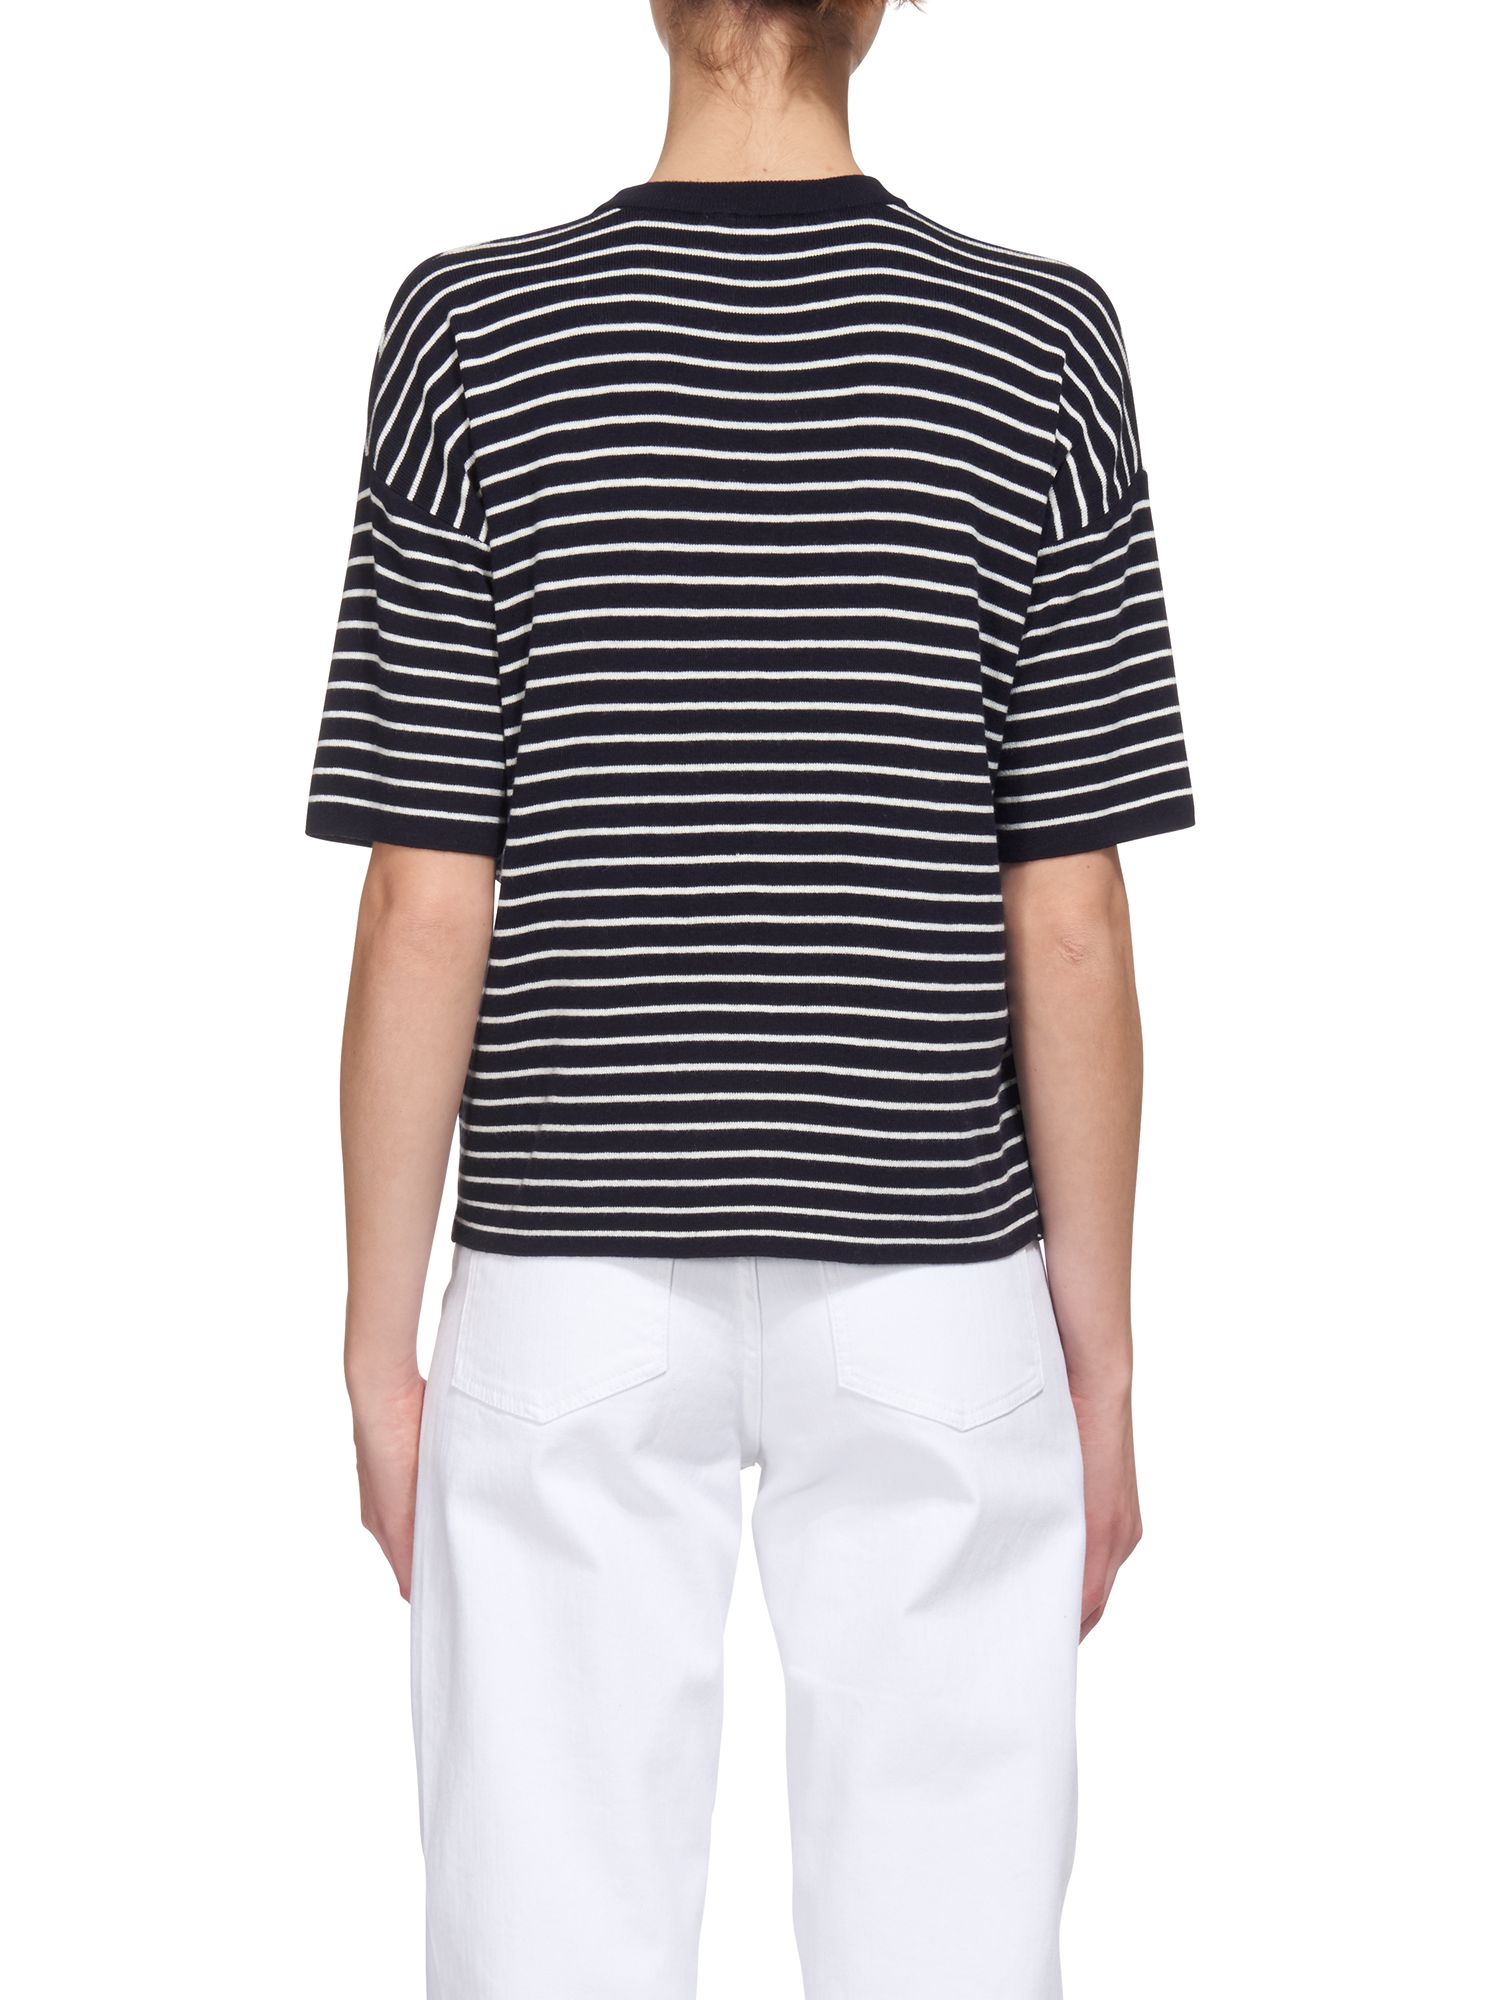 Whistles Knot Front Easy Stripe T-Shirt, Navy